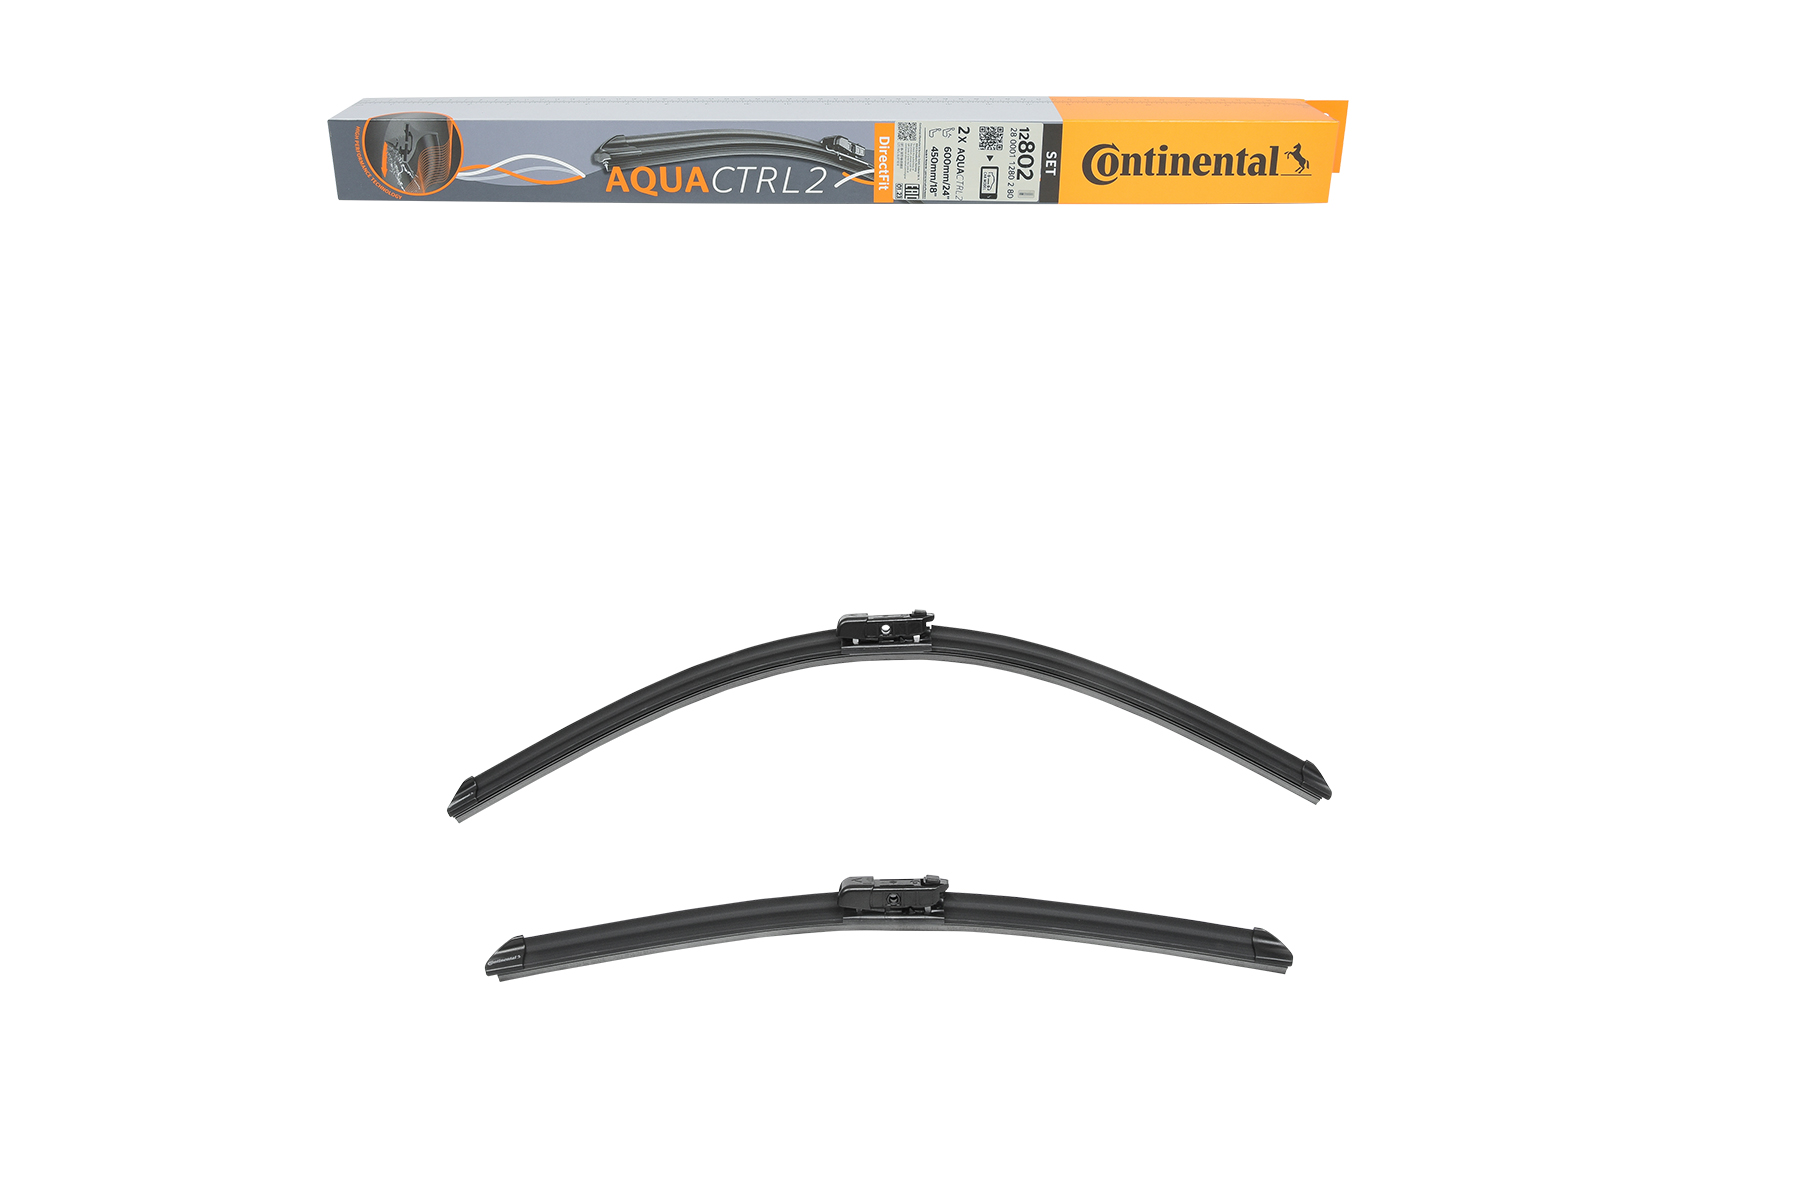 Continental AQUACTRL2 2800011280280 Wiper blade 600, 450 mm Front, Flat wiper blade, with spoiler, 24/18 Inch